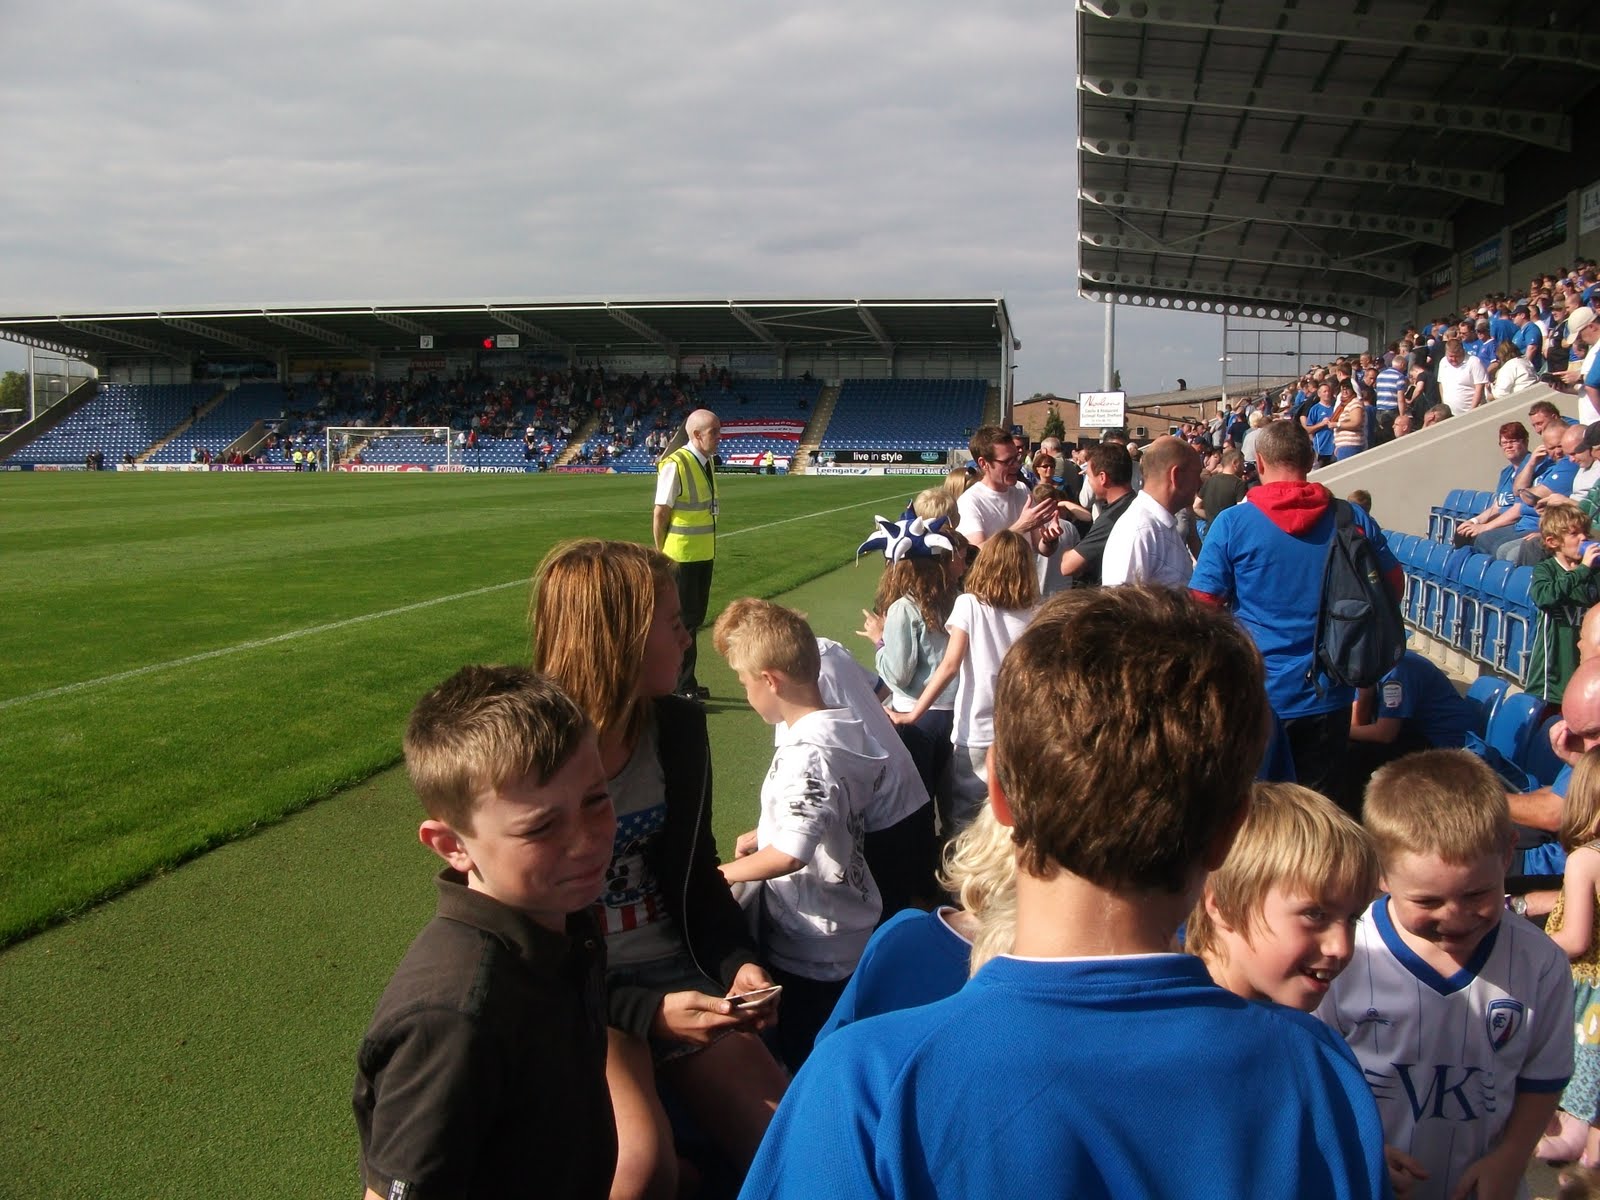 chesterfield fc - photo #12